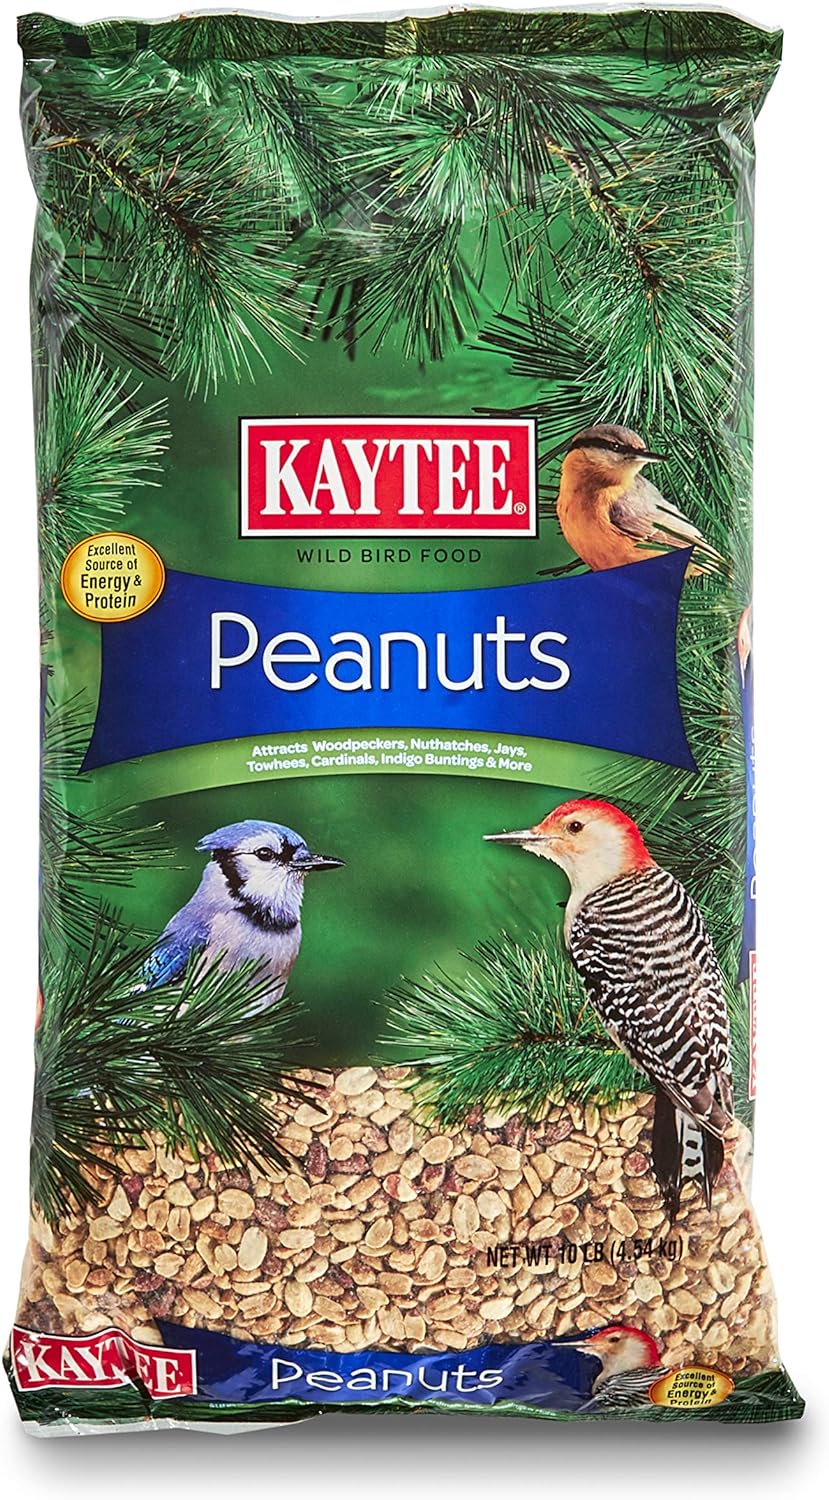 Amazon.com: Kaytee Shelled Peanuts For Woodpeckers, Nuthatches, Jays, Towhees, Cardinals, Indigo Buntings & Other Wild Birds, 10 Pound : Patio, Lawn & Garden - $11.99